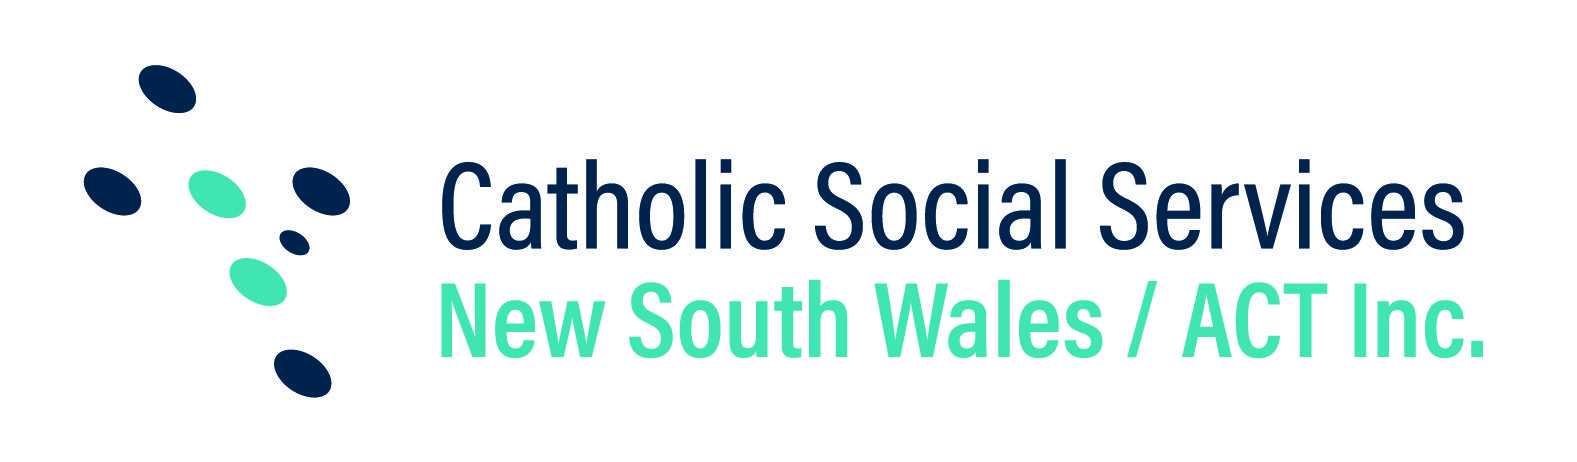 Catholic Social Services NSW/ACT